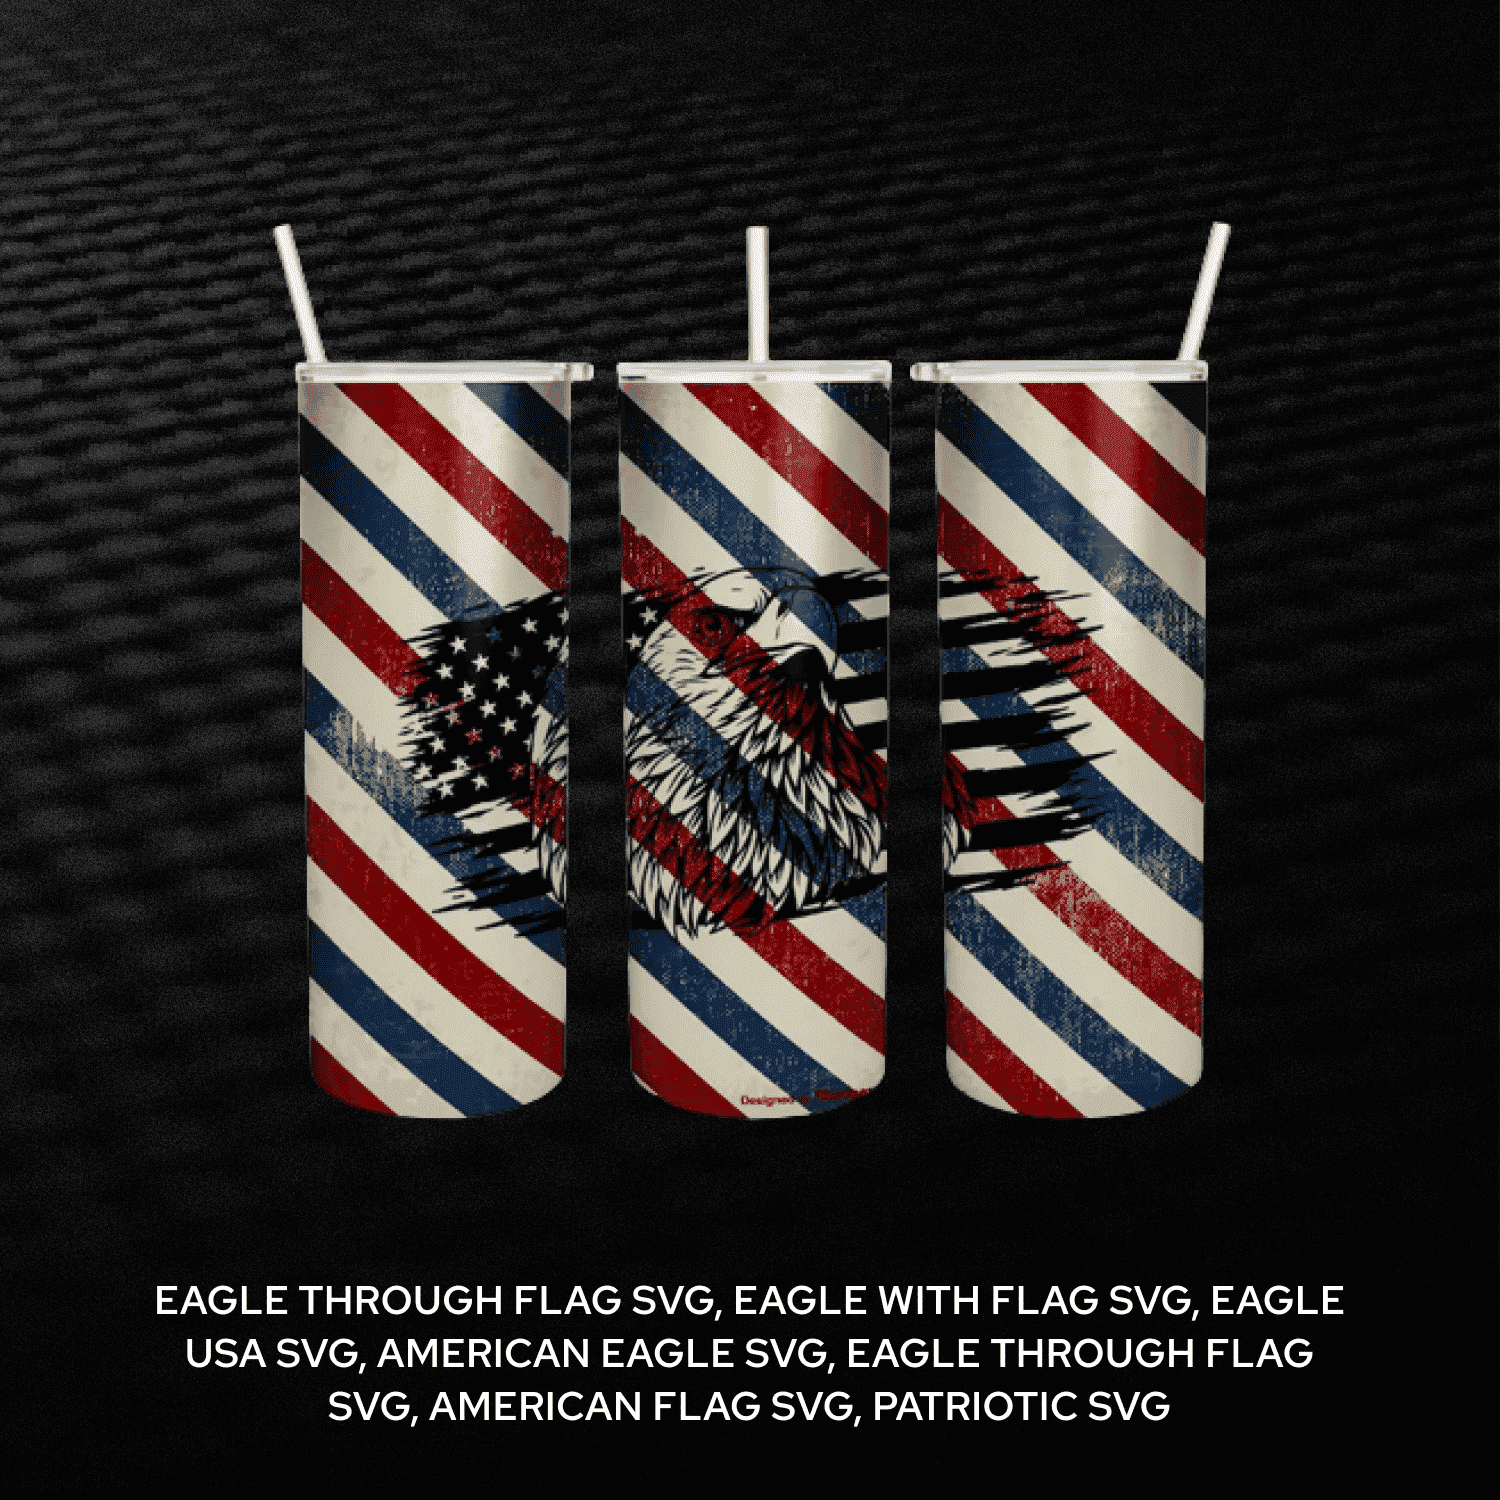 Pair of american eagle eagle flags on a black background.